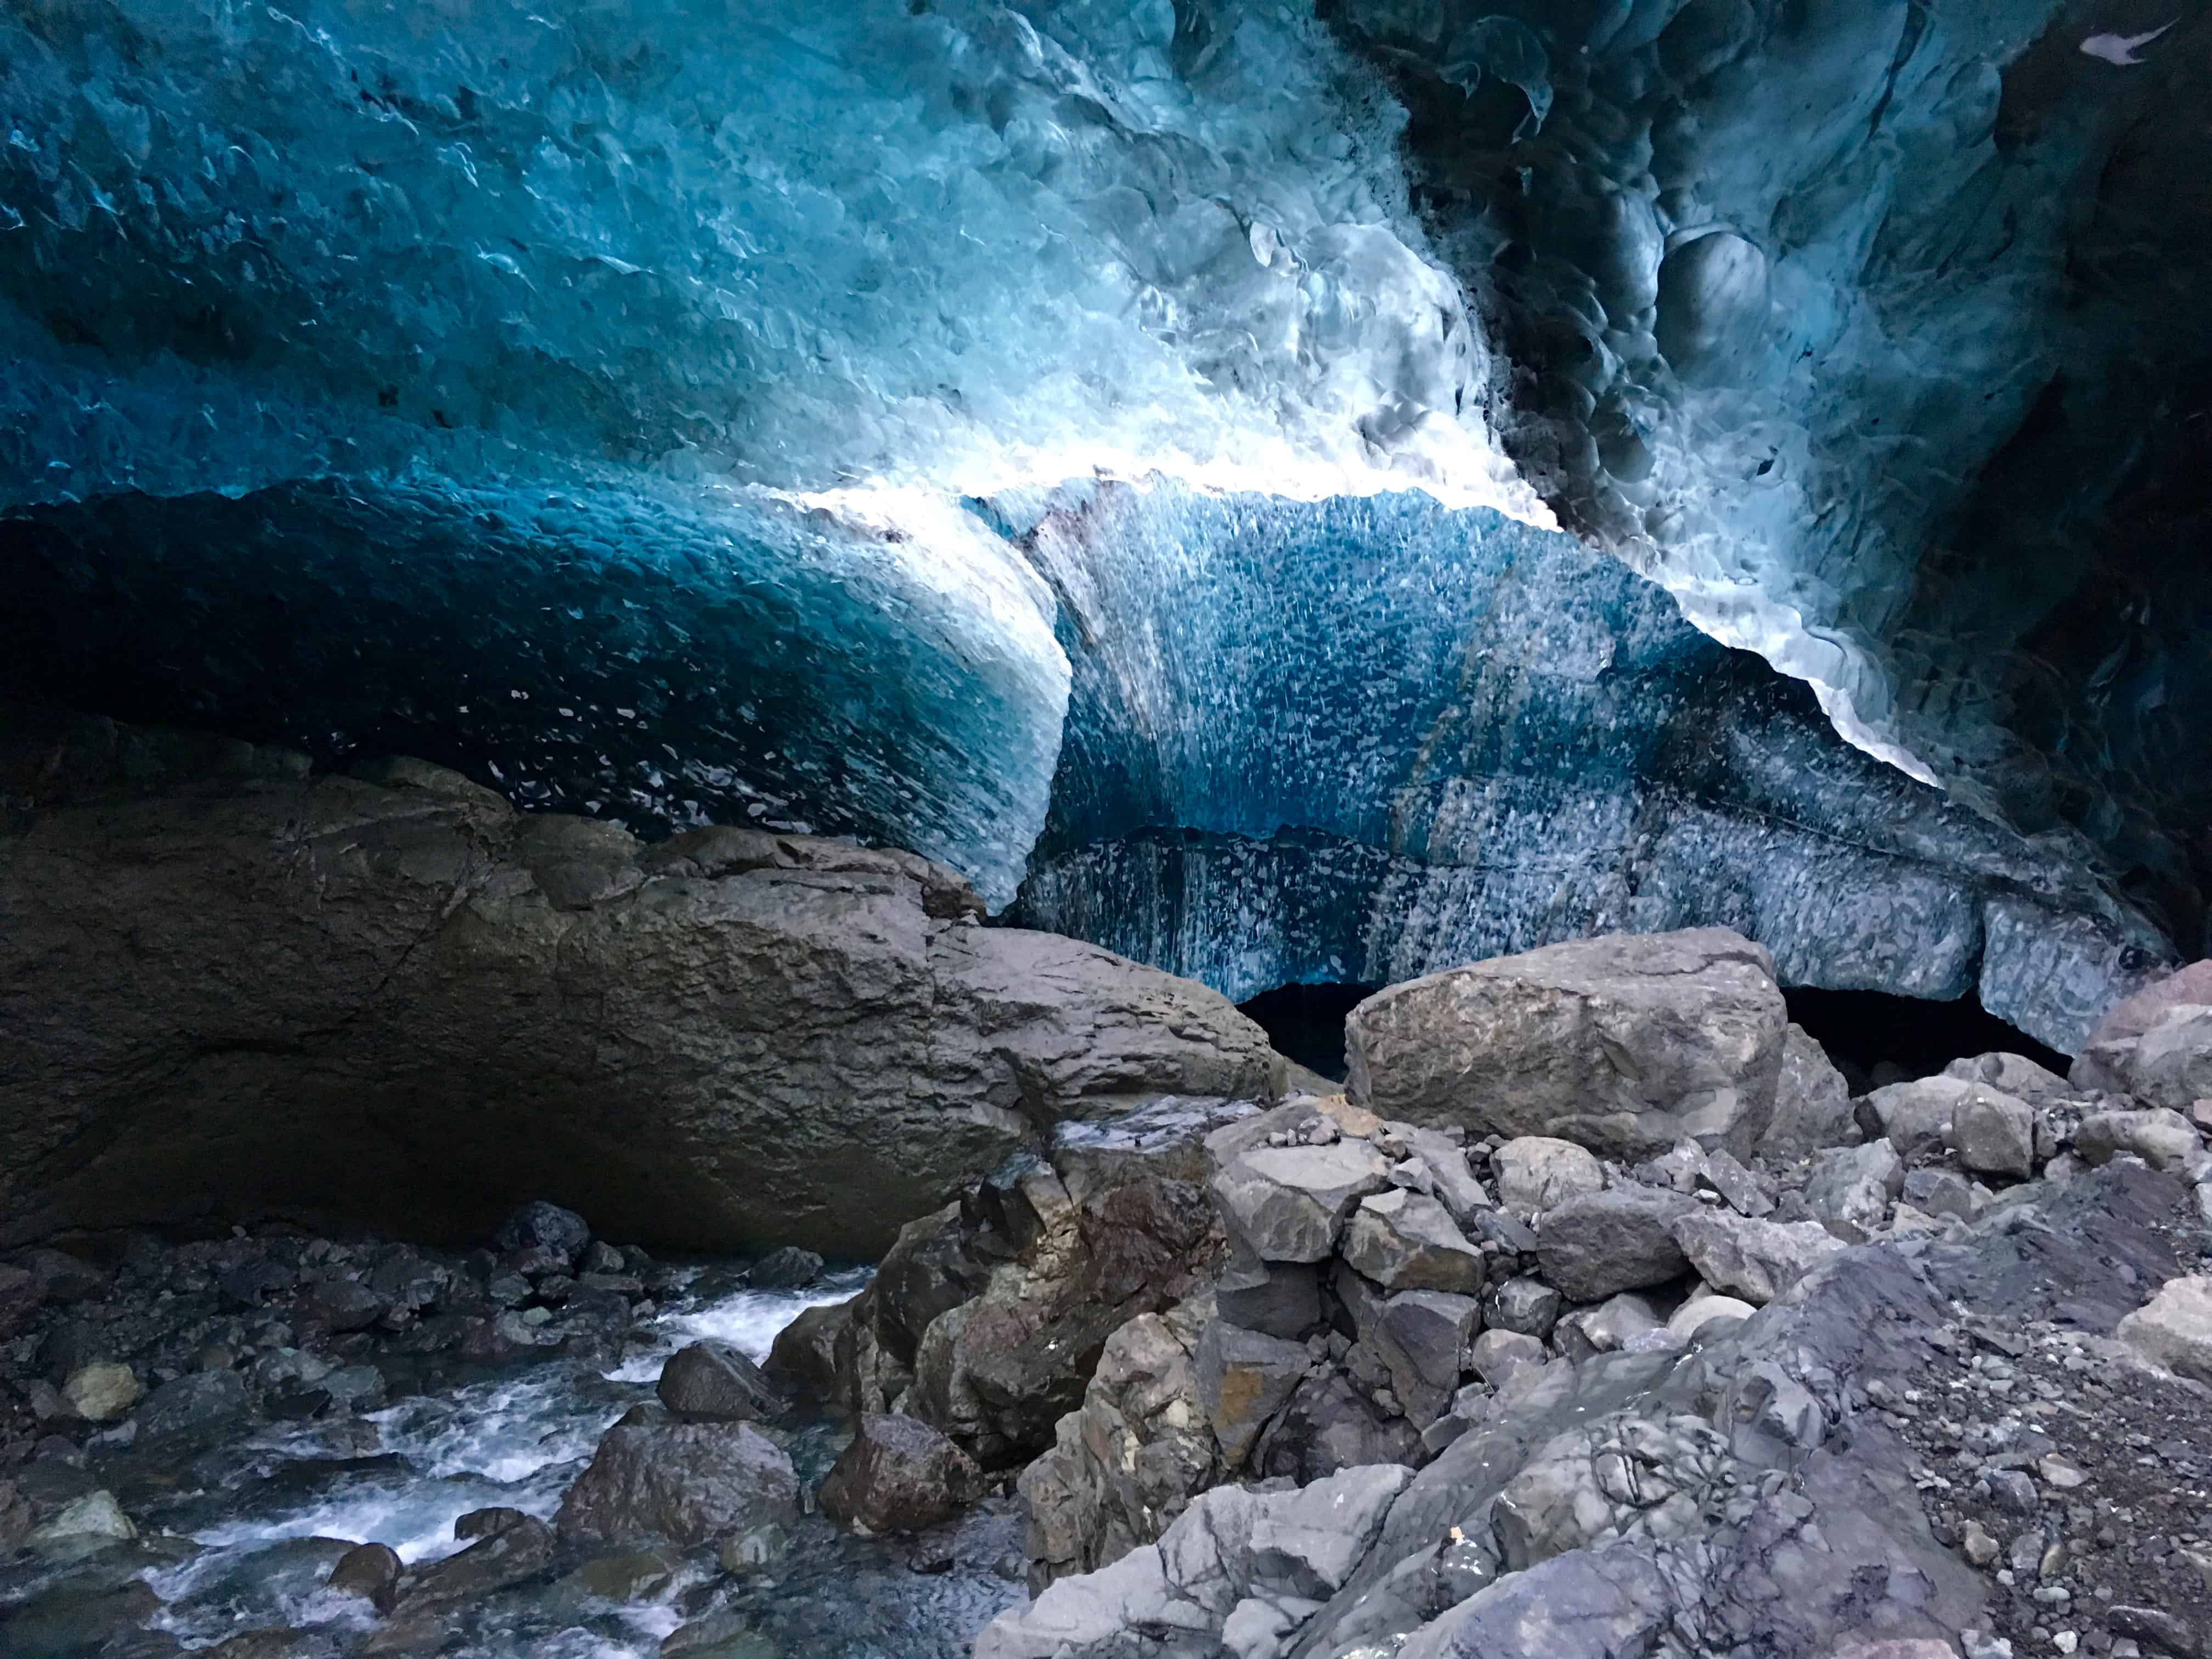 River and ice inside Waterfall Ice Cave at Vatnajökull, Iceland